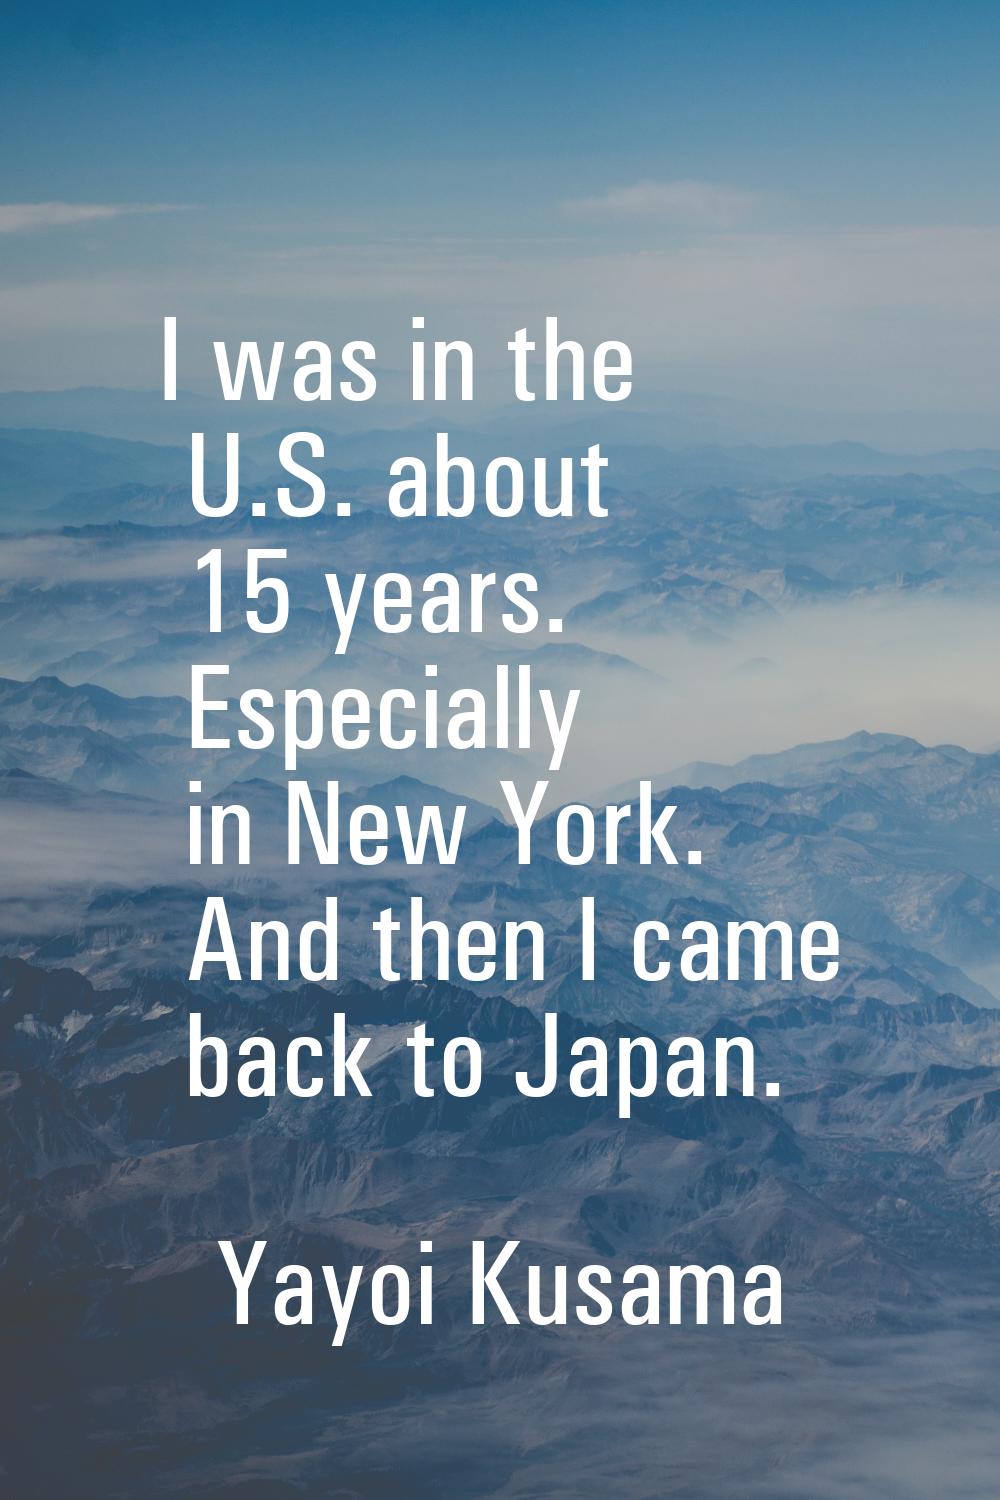 I was in the U.S. about 15 years. Especially in New York. And then I came back to Japan.